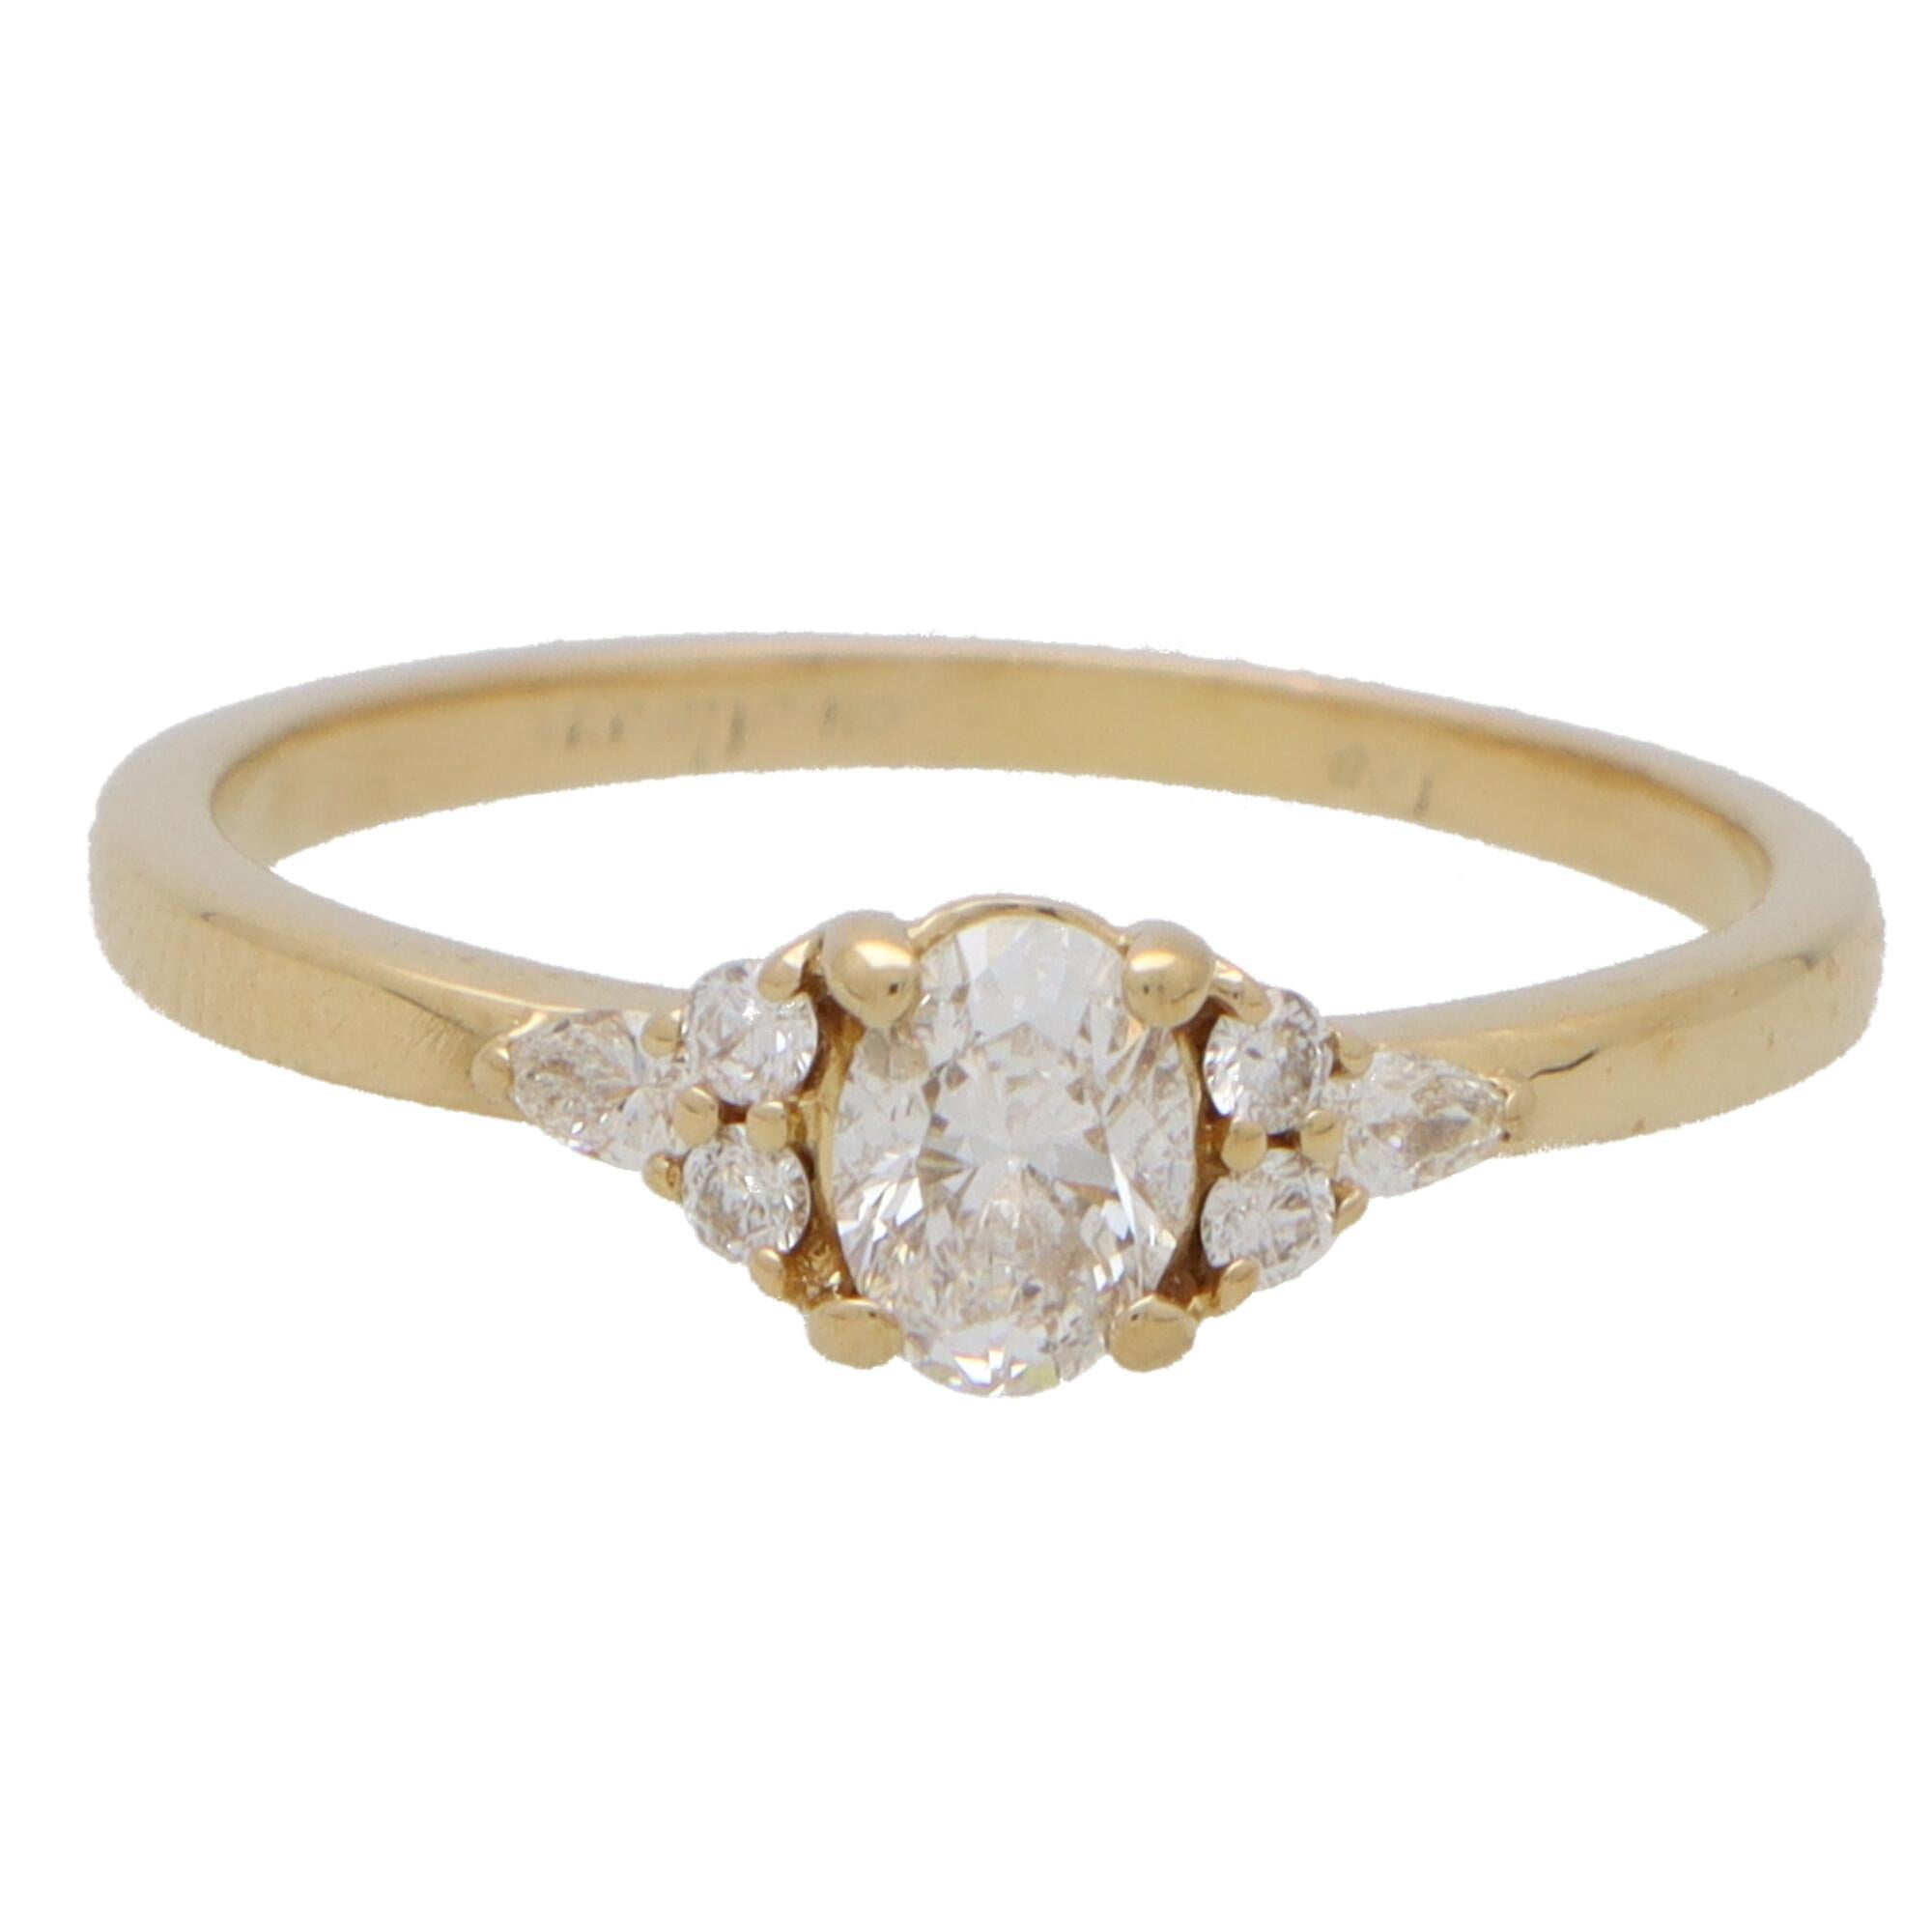 Contemporary Vintage GIA Certified Oval Cut Diamond Ring Set in 18k Yellow Gold